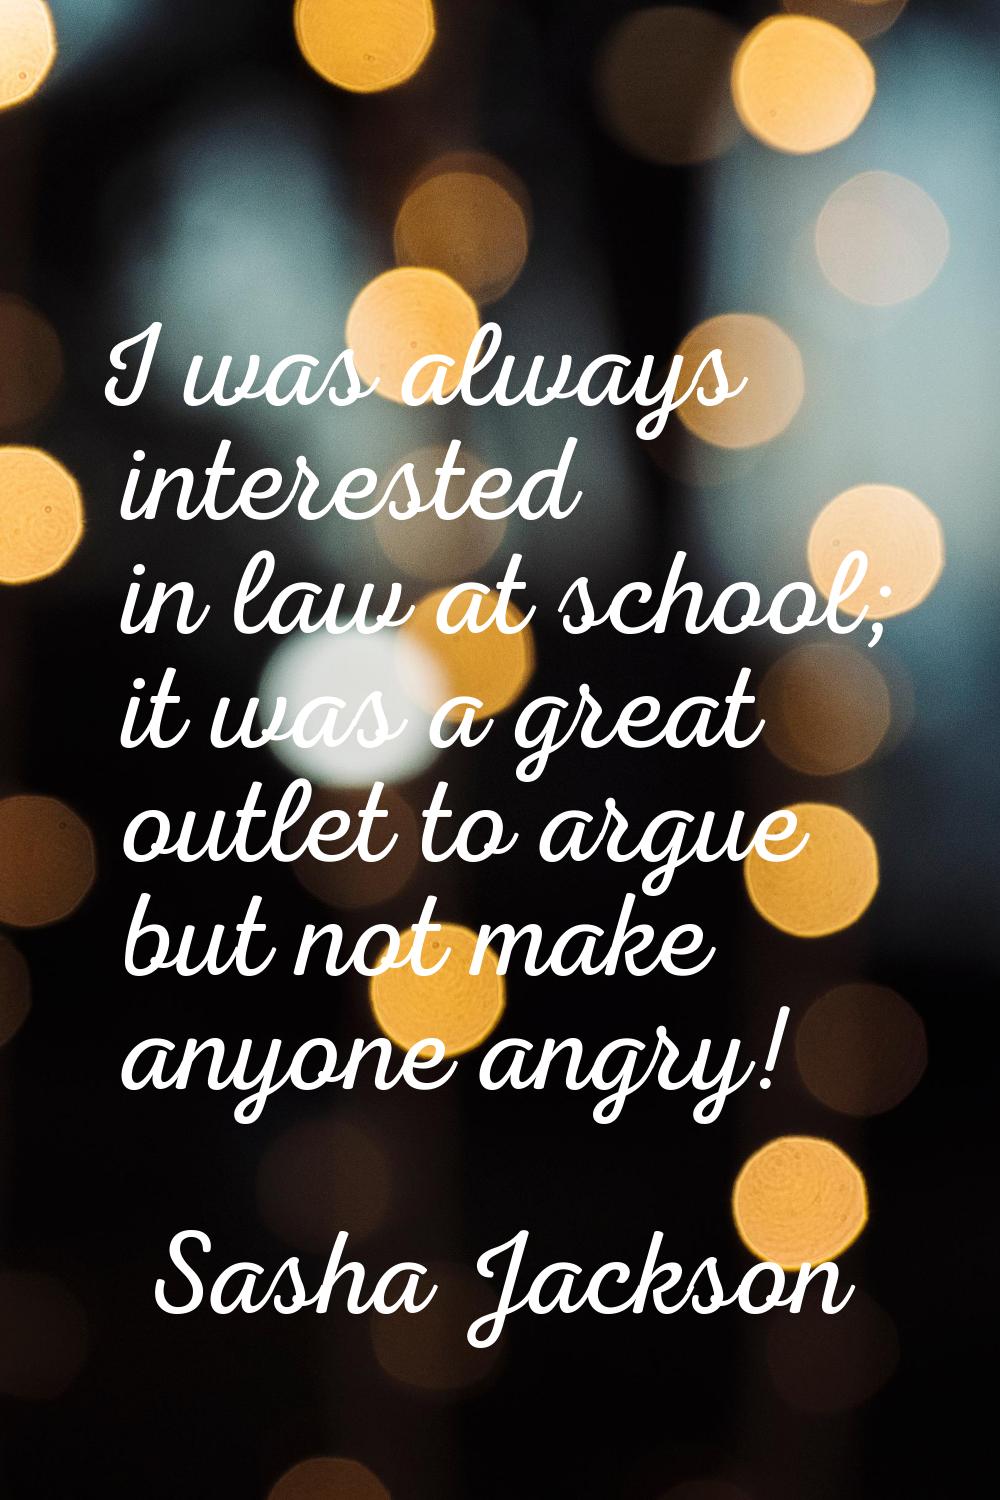 I was always interested in law at school; it was a great outlet to argue but not make anyone angry!